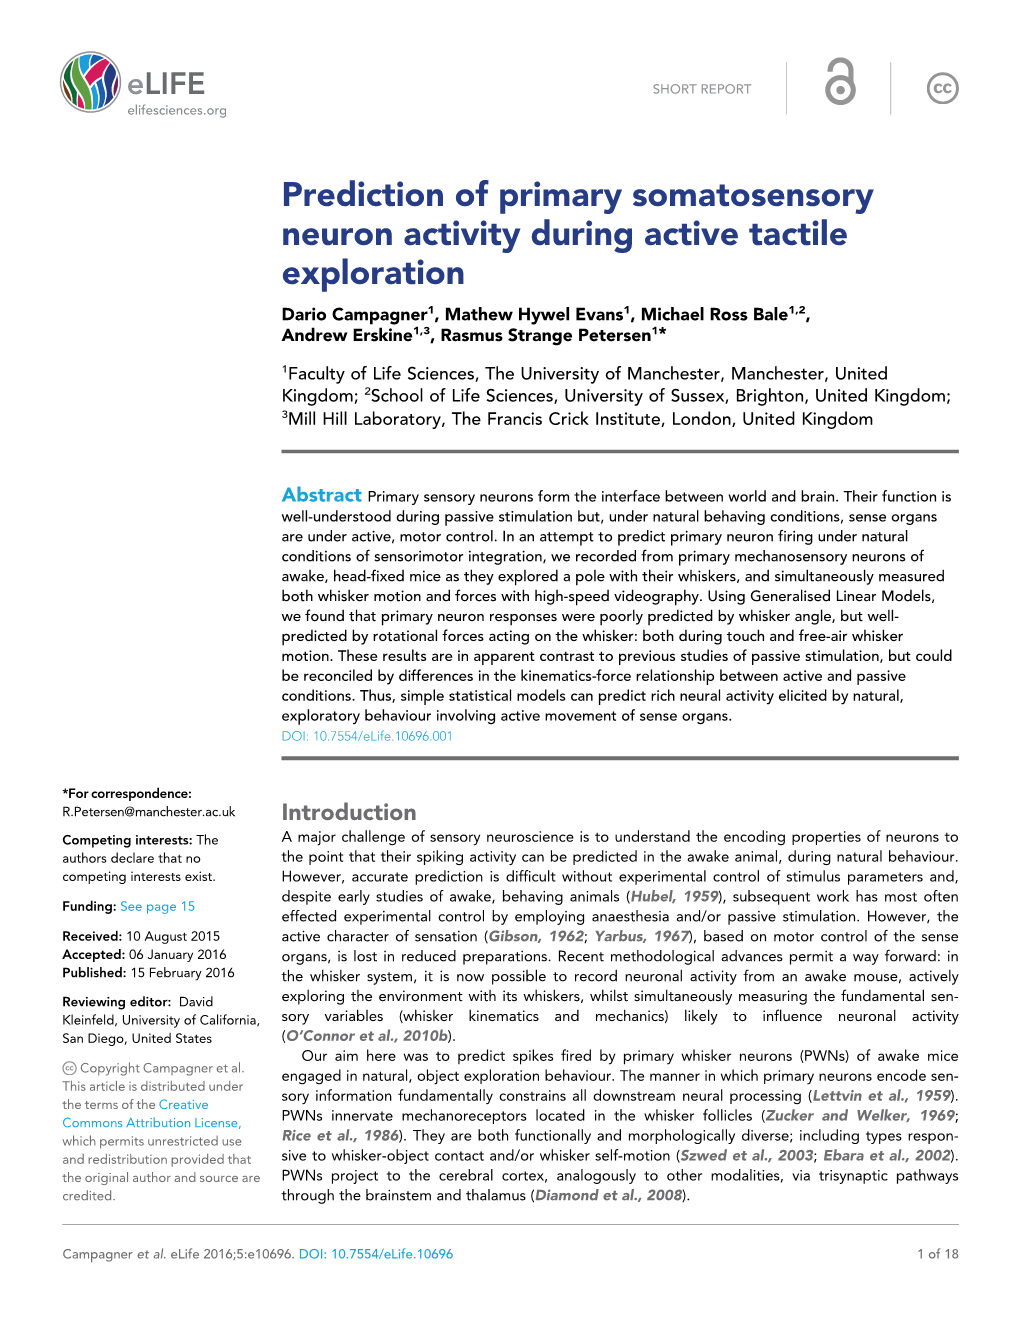 Prediction of Primary Somatosensory Neuron Activity During Active Tactile